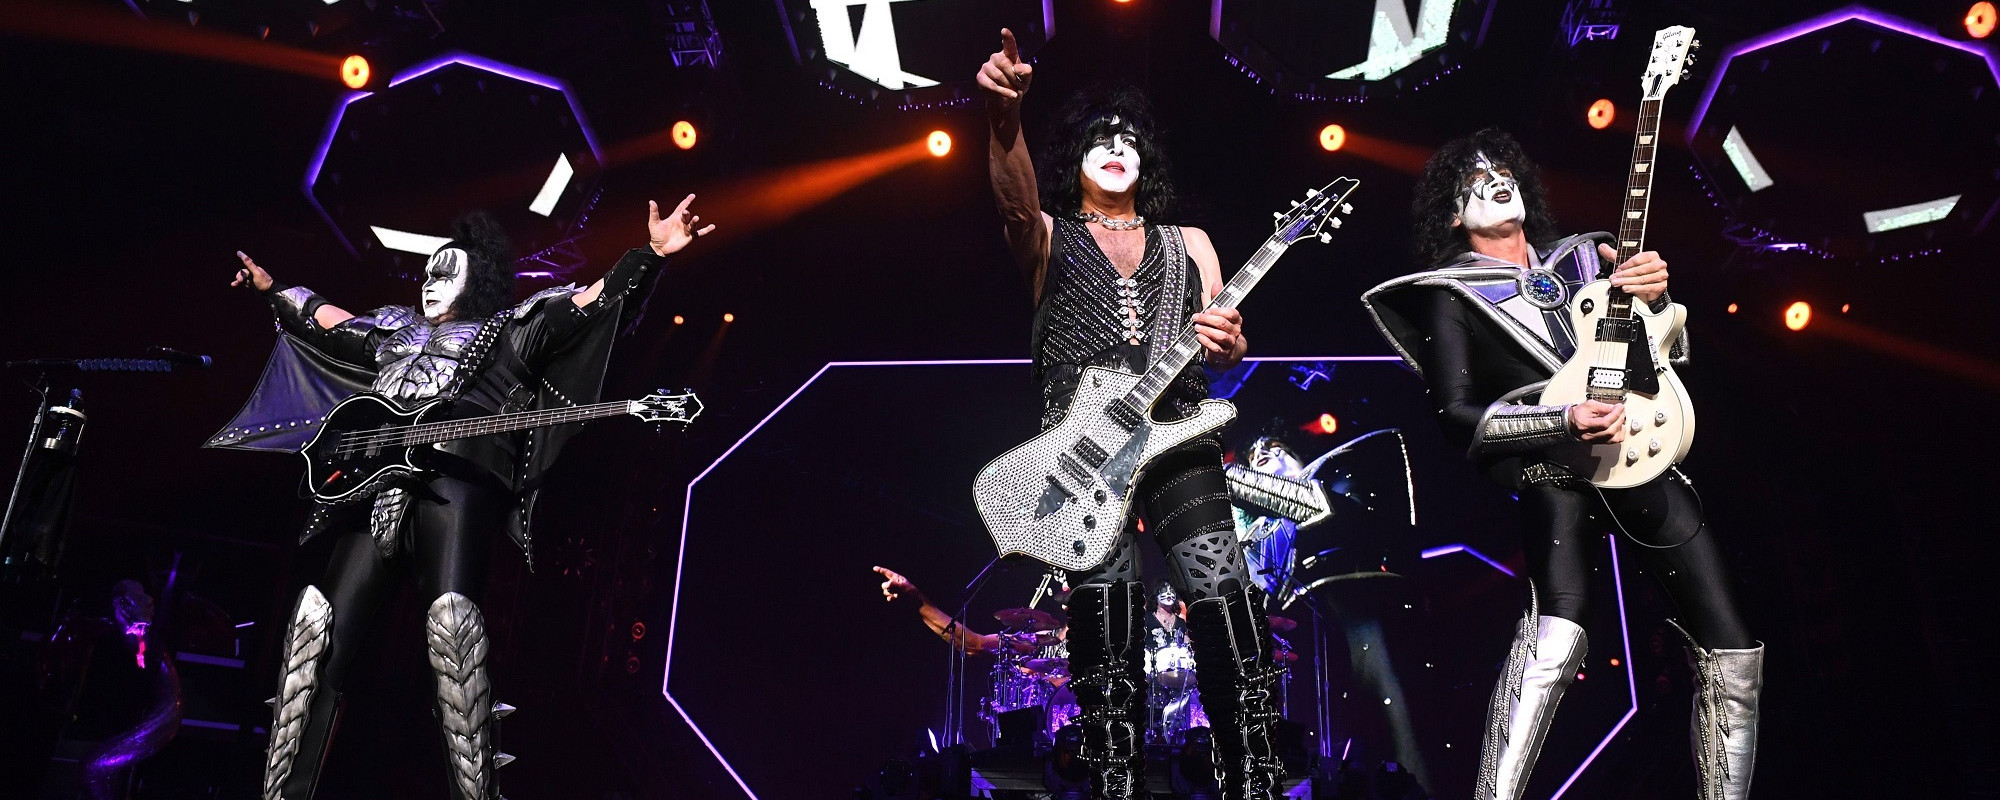 Final KISS Concerts to Be Commemorated with Special Empire State Building Light Show